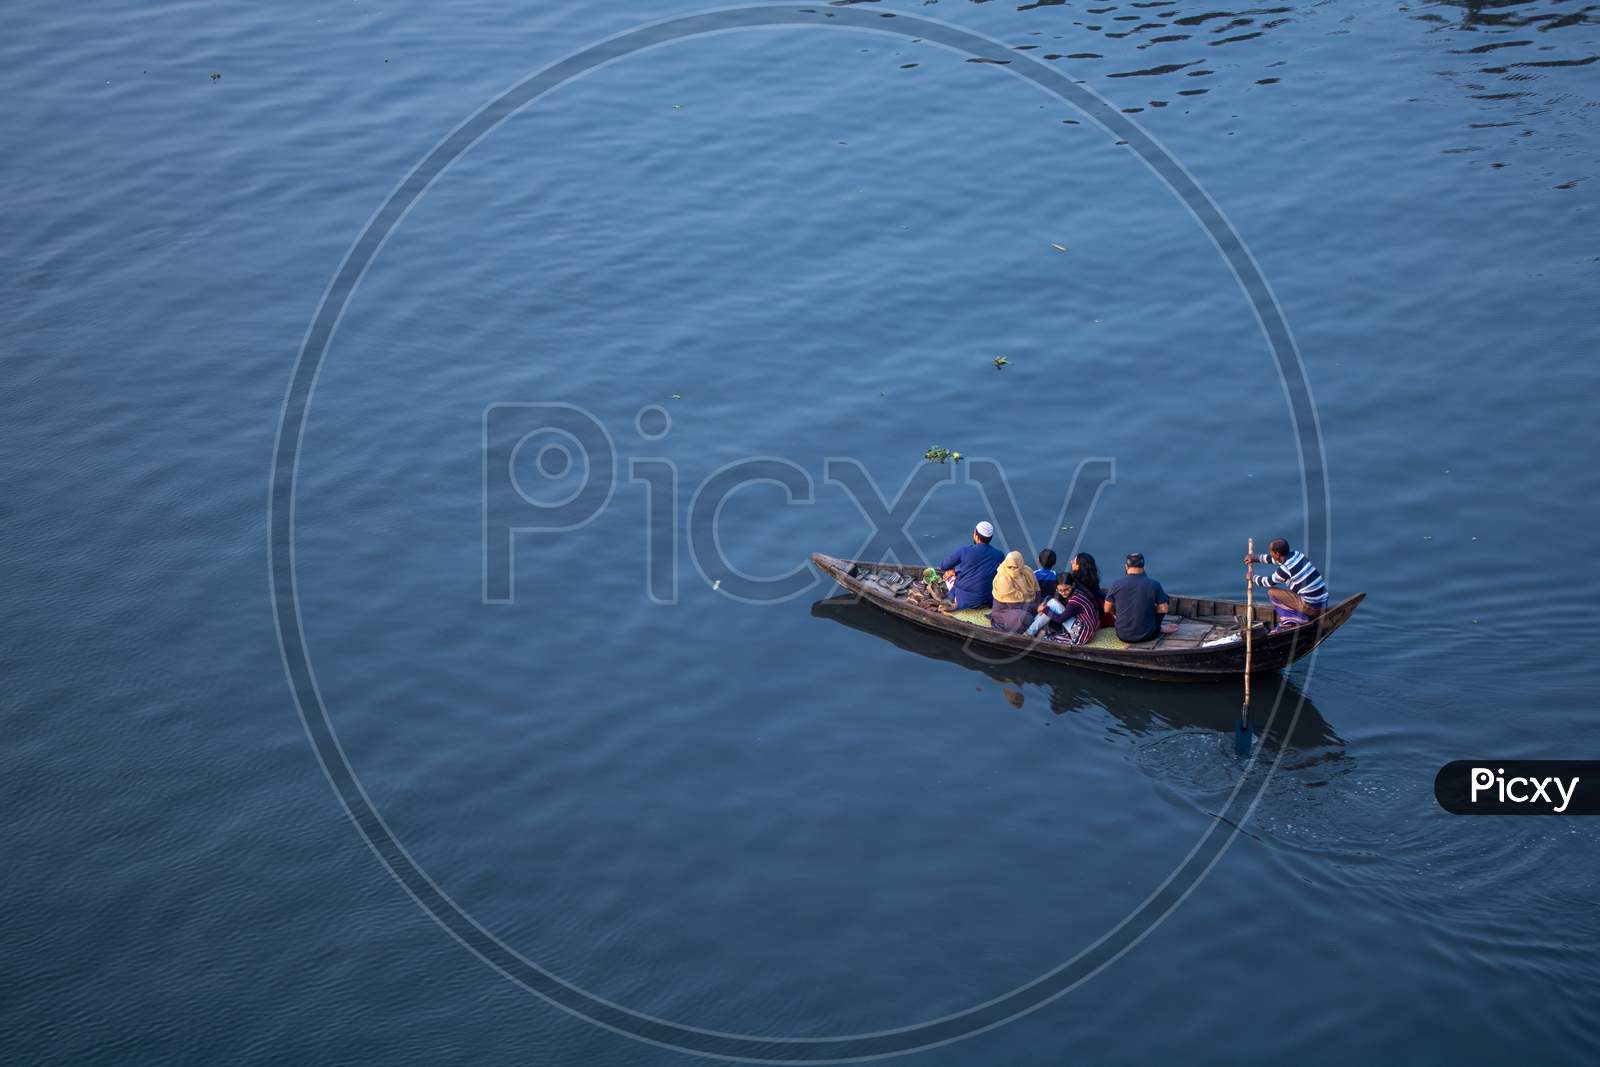 Everyone Is Taking A Boat Ride On The River Buriganga Near The Capital City.